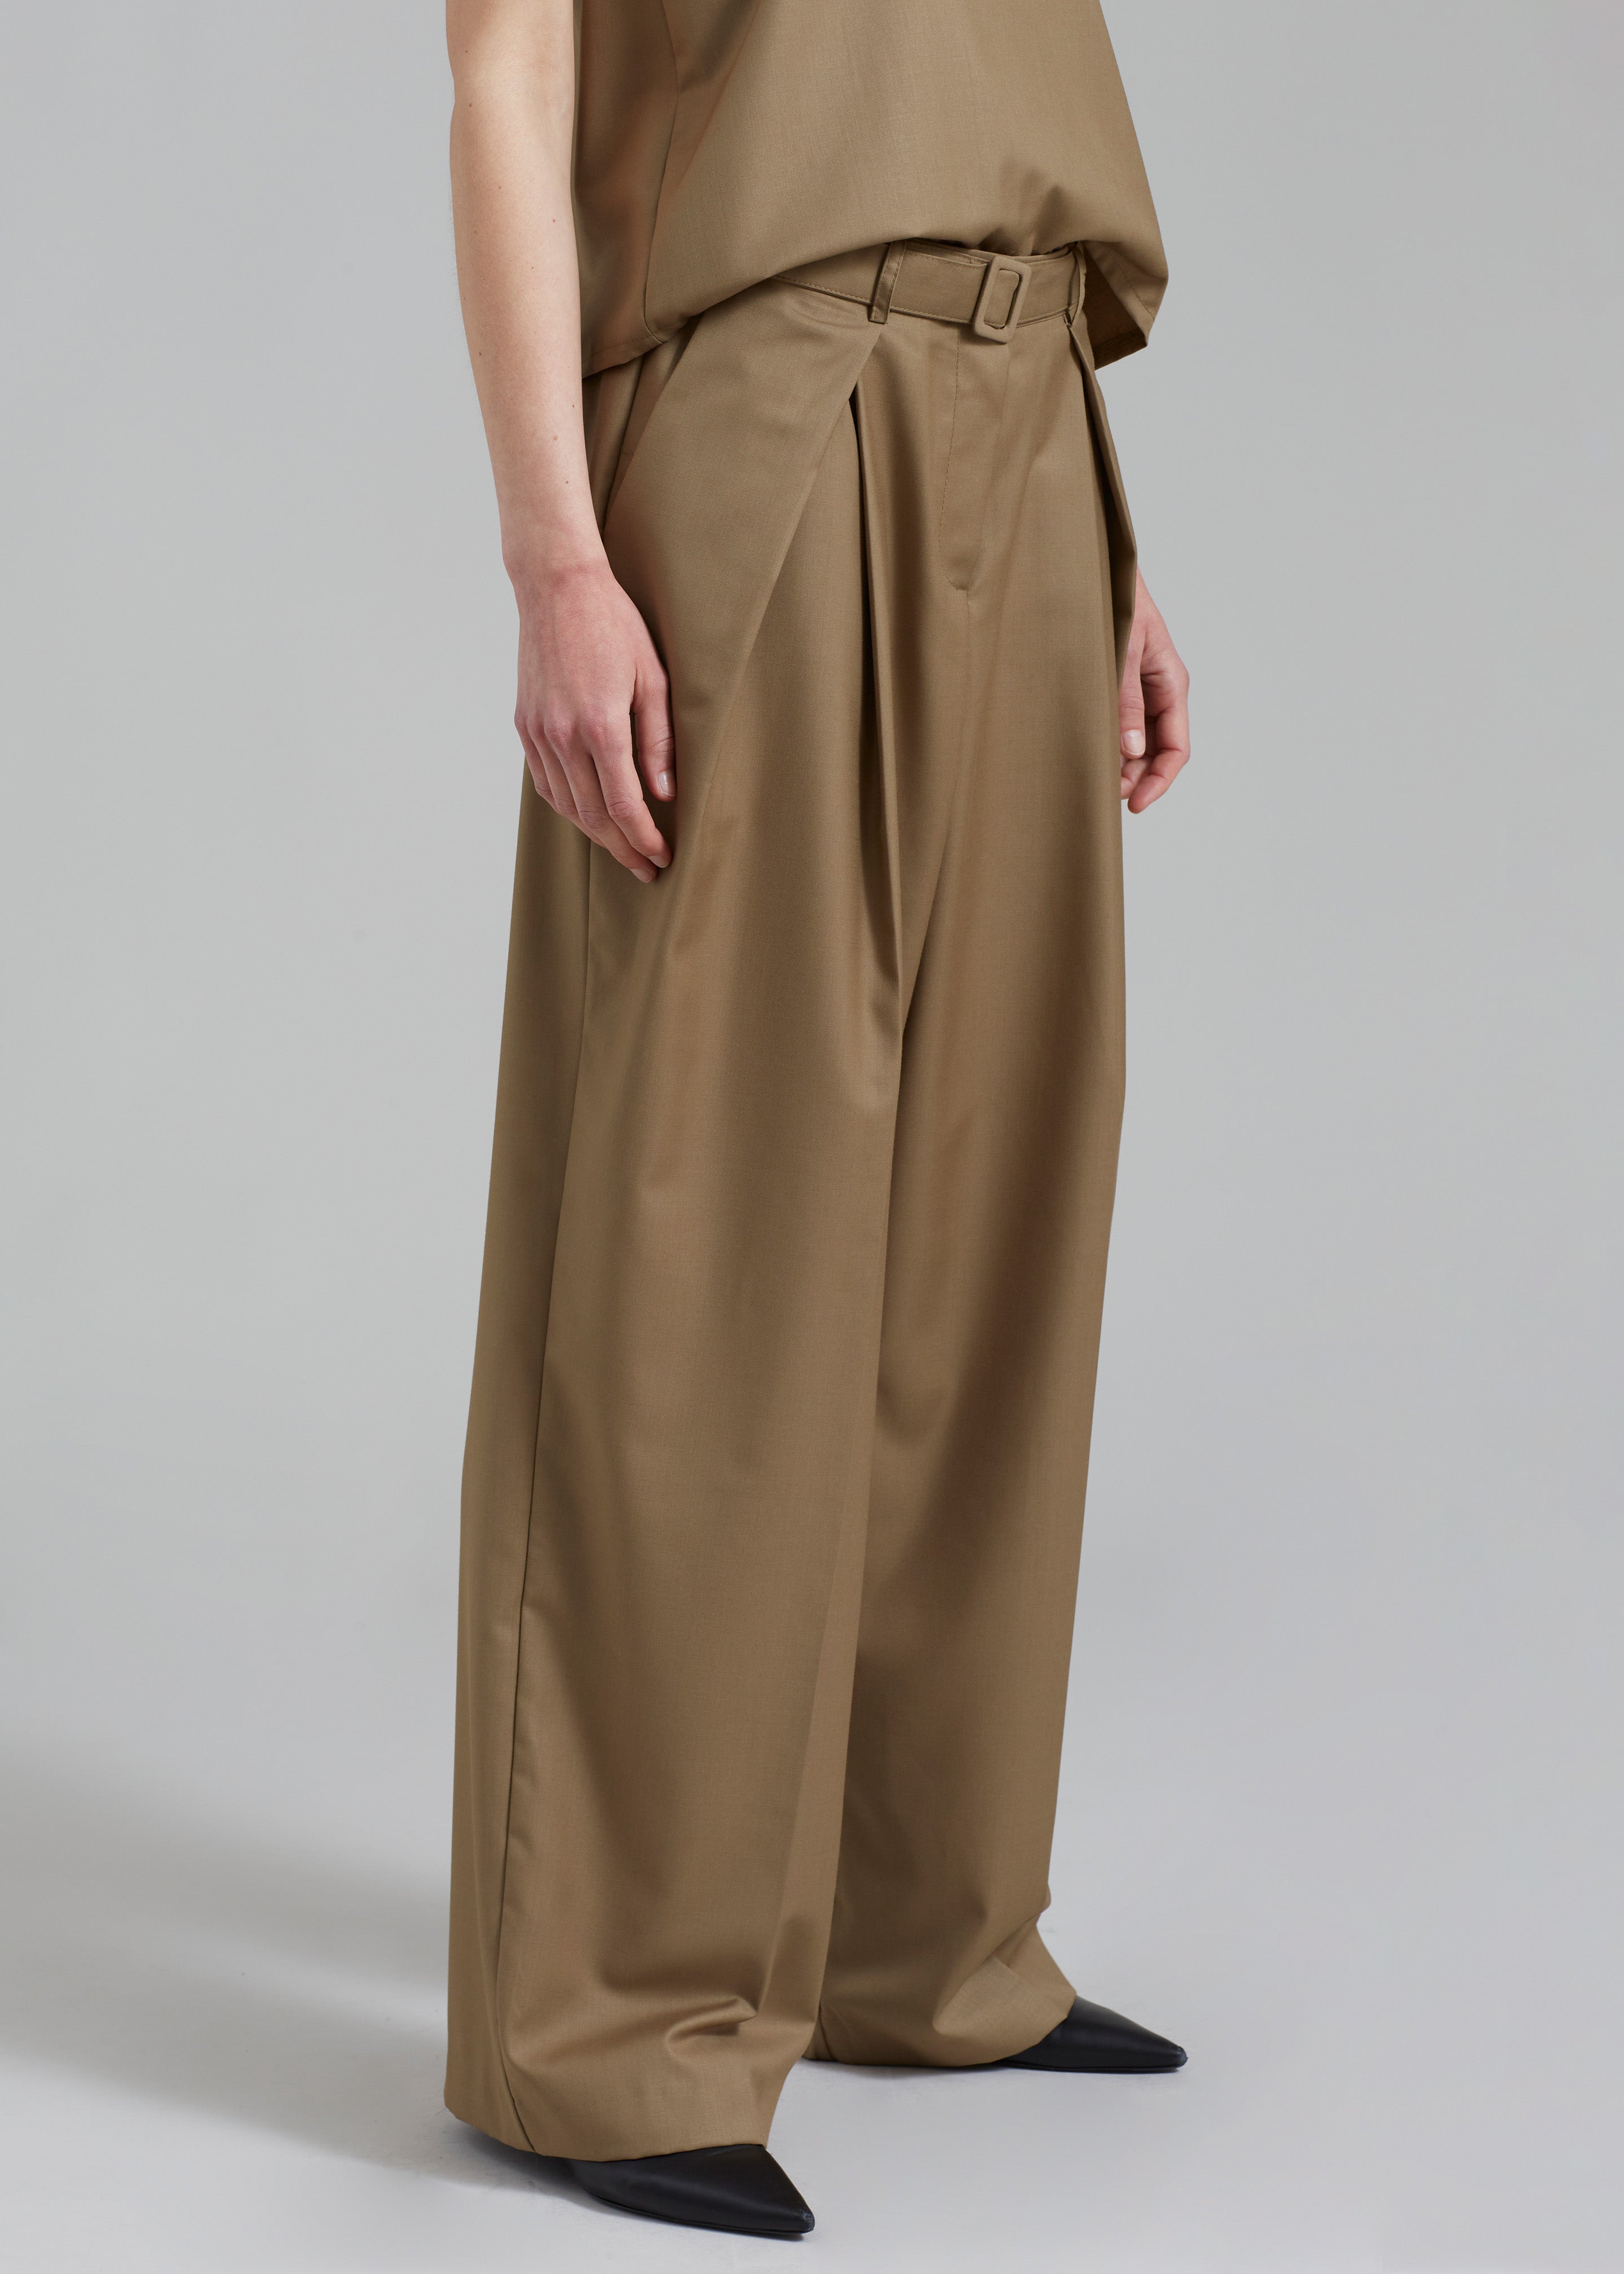 Clay Belted Pants - Desert Taupe - 13